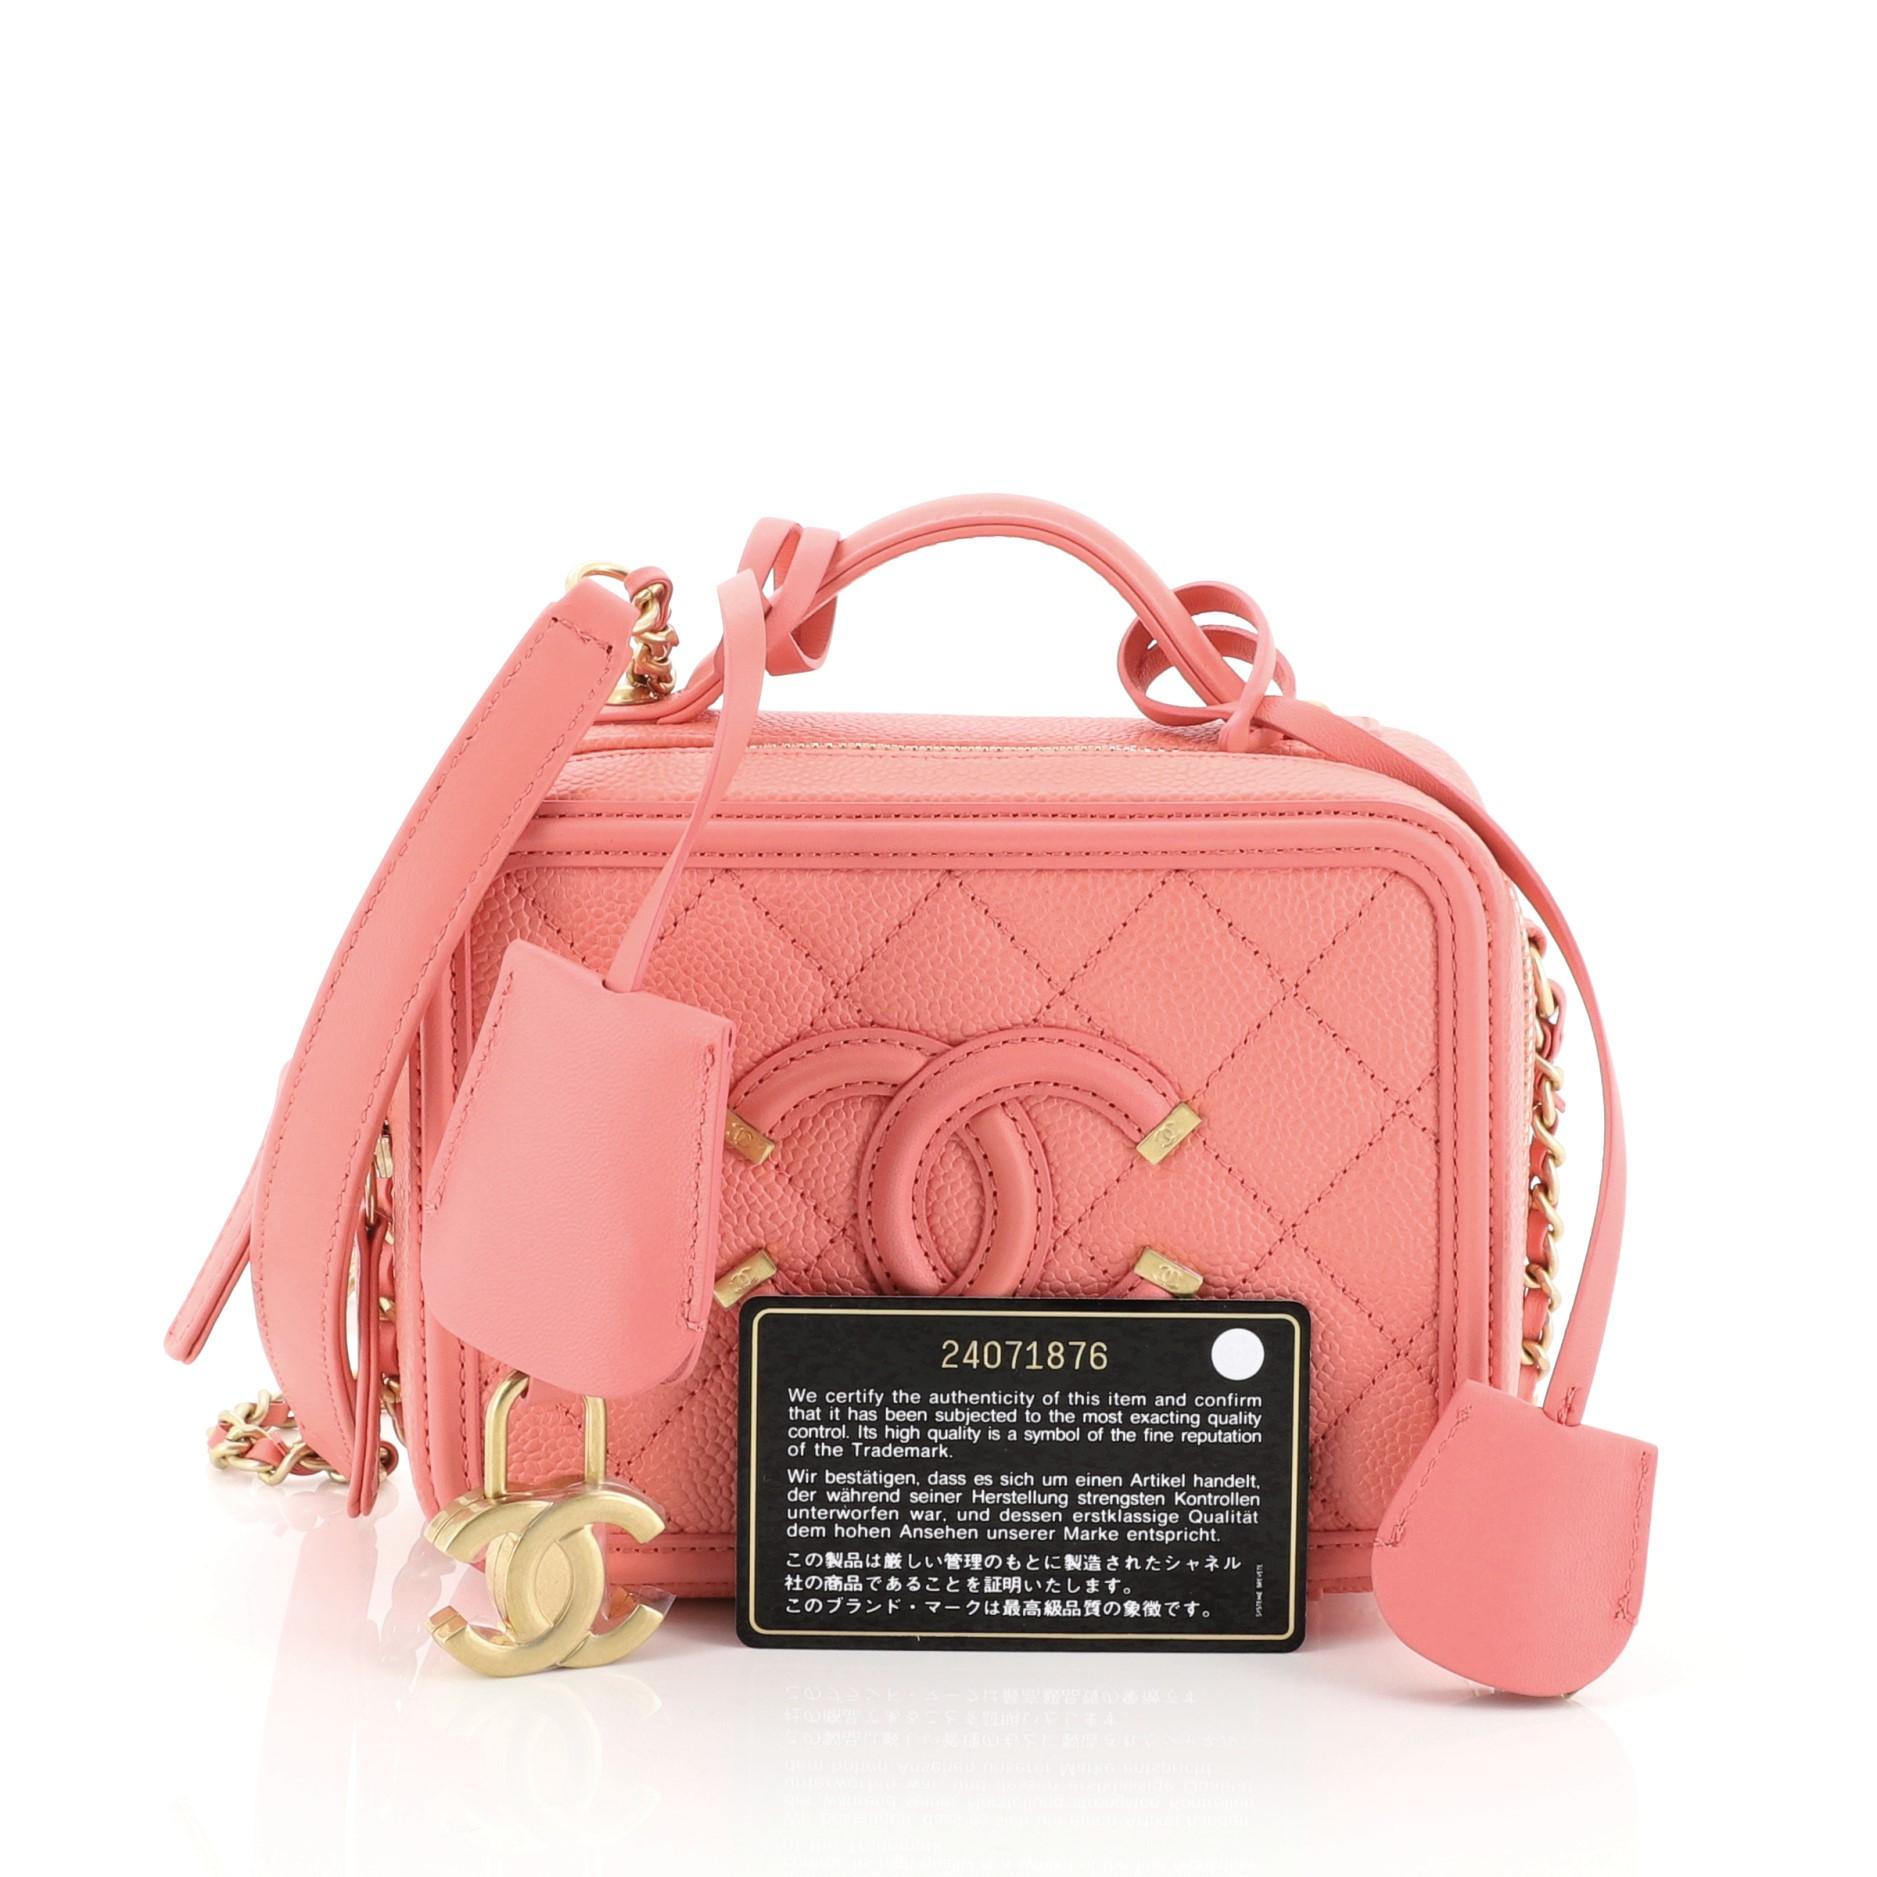 This Chanel Filigree Vanity Case Quilted Caviar Small, crafted in pink quilted caviar leather, features a leather top handle, woven-in leather chain strap, CC stitched logo at front and matte gold-tone hardware. Its zip-around closure opens to a